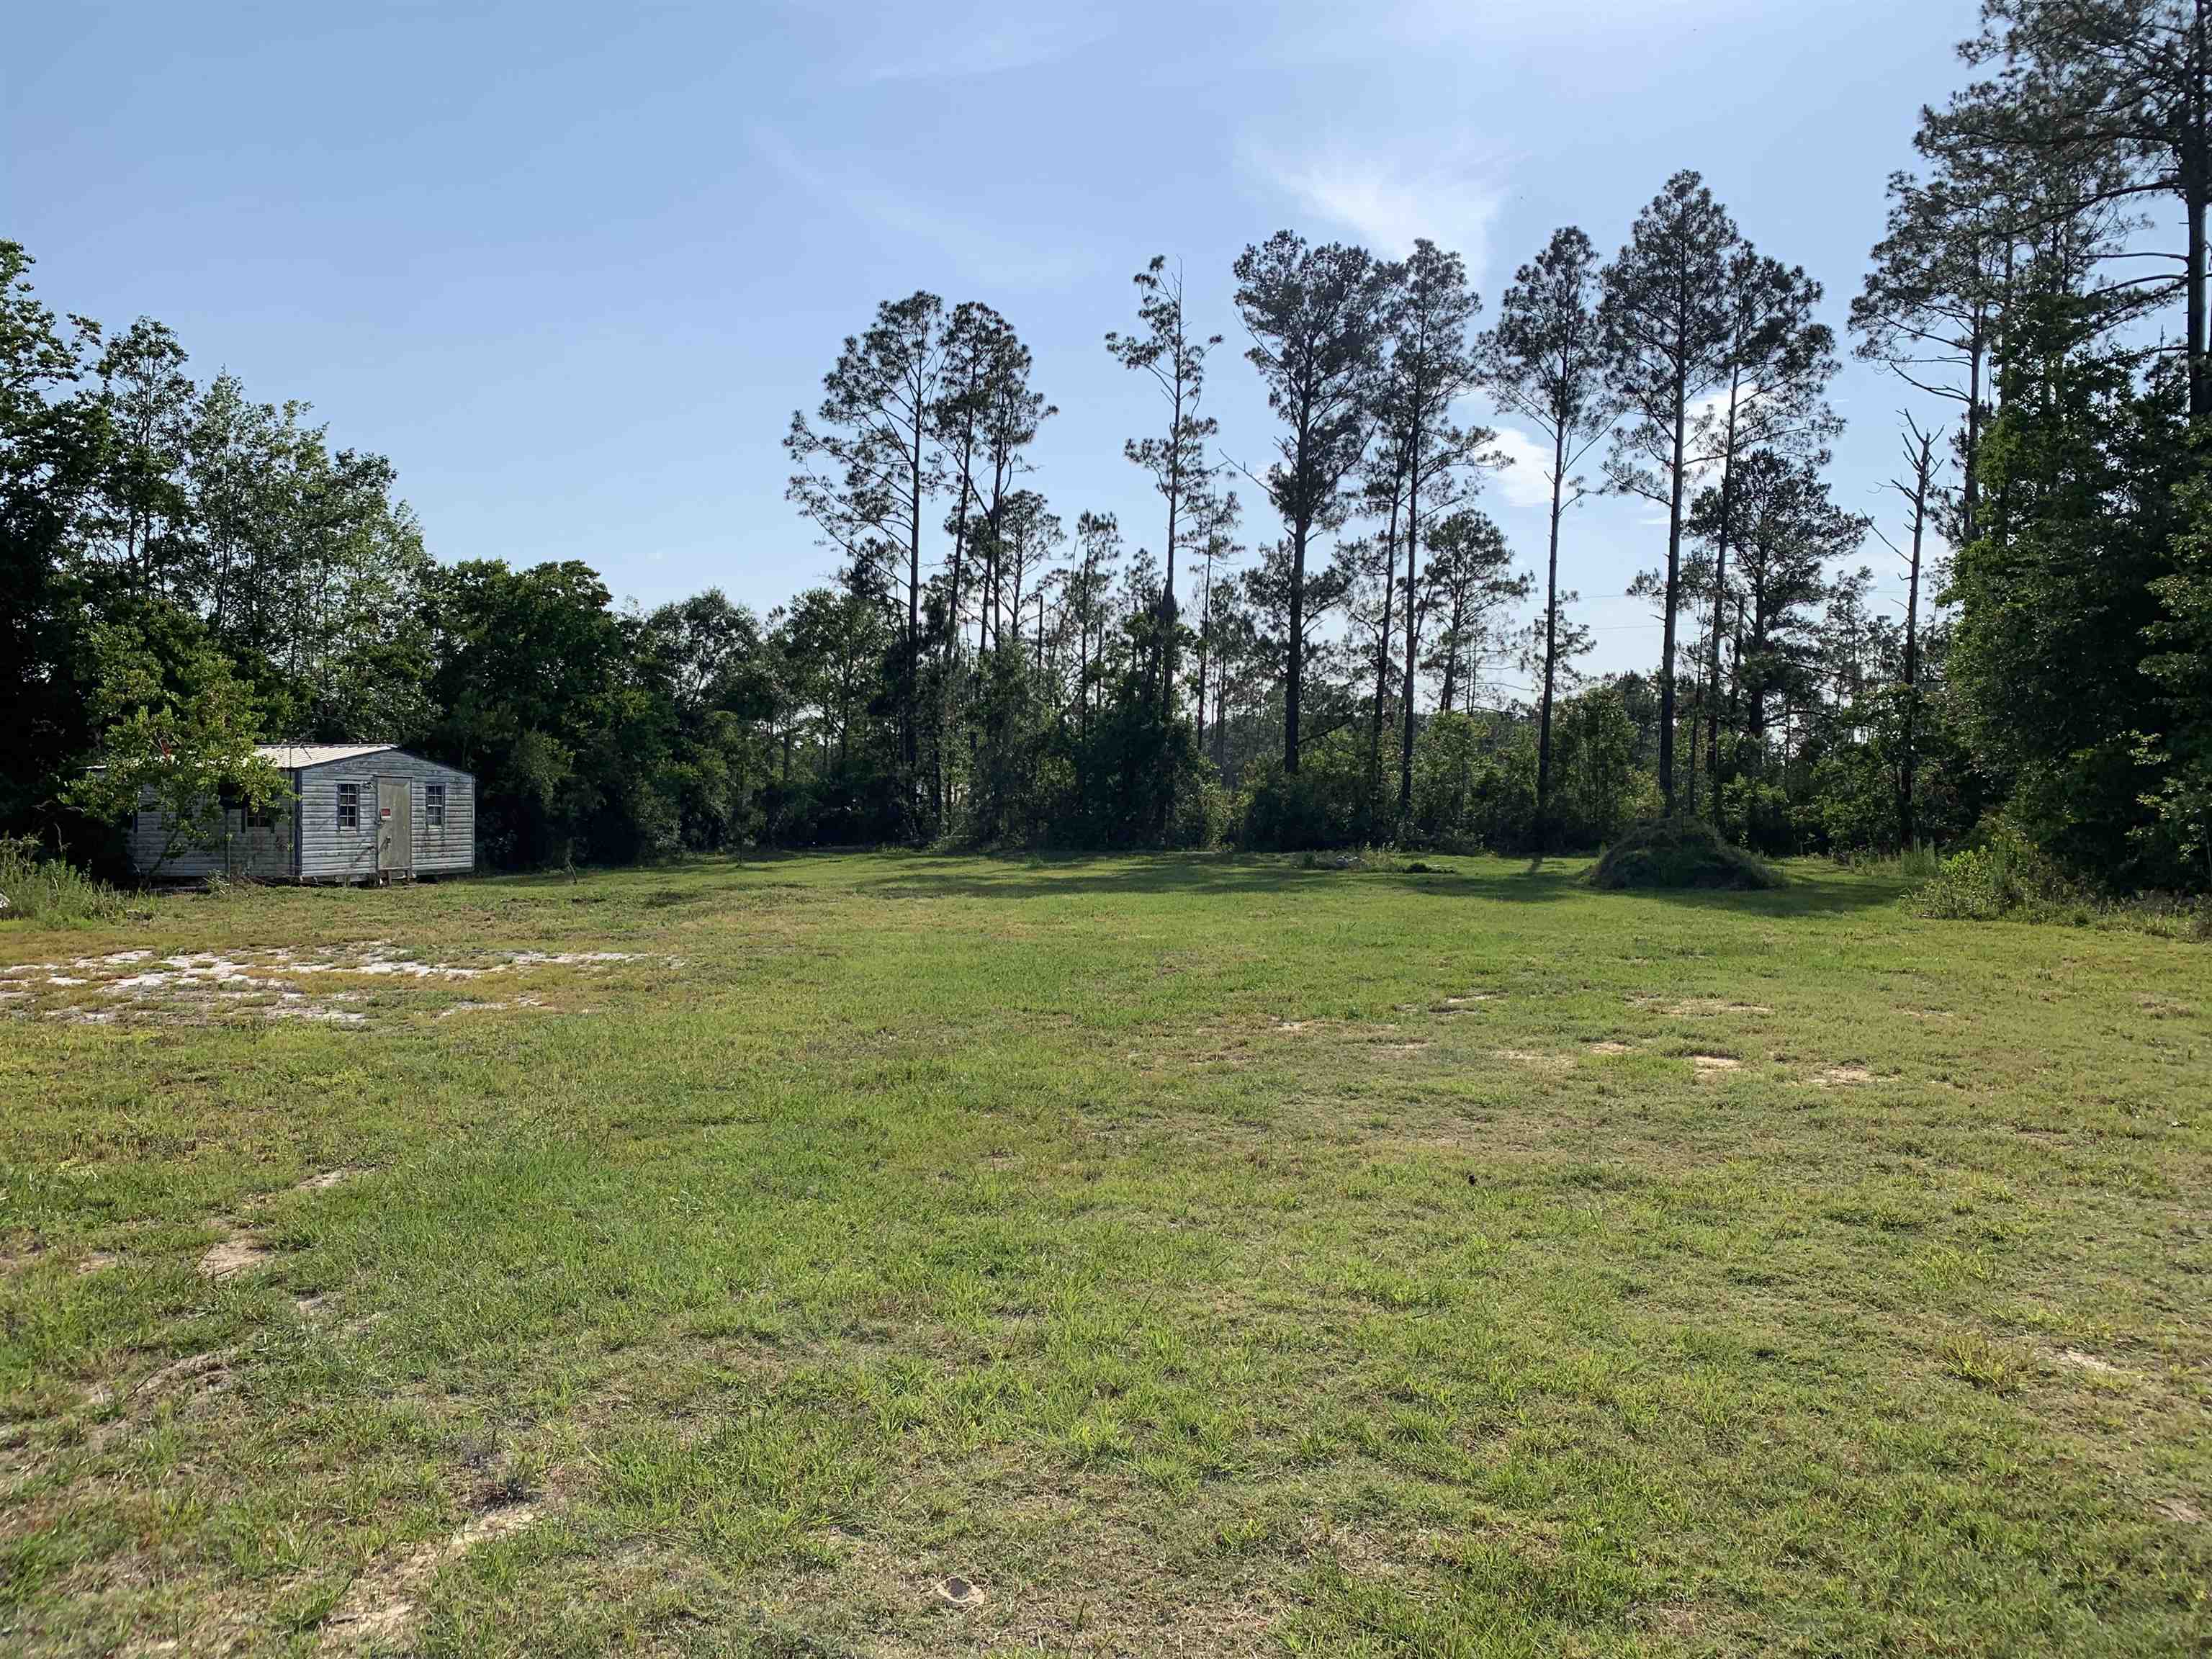 291 James Pitts Drive,WEWAHITCHKA,Florida 32465,3 Bedrooms Bedrooms,2 BathroomsBathrooms,Manuf/mobile home,291 James Pitts Drive,365742